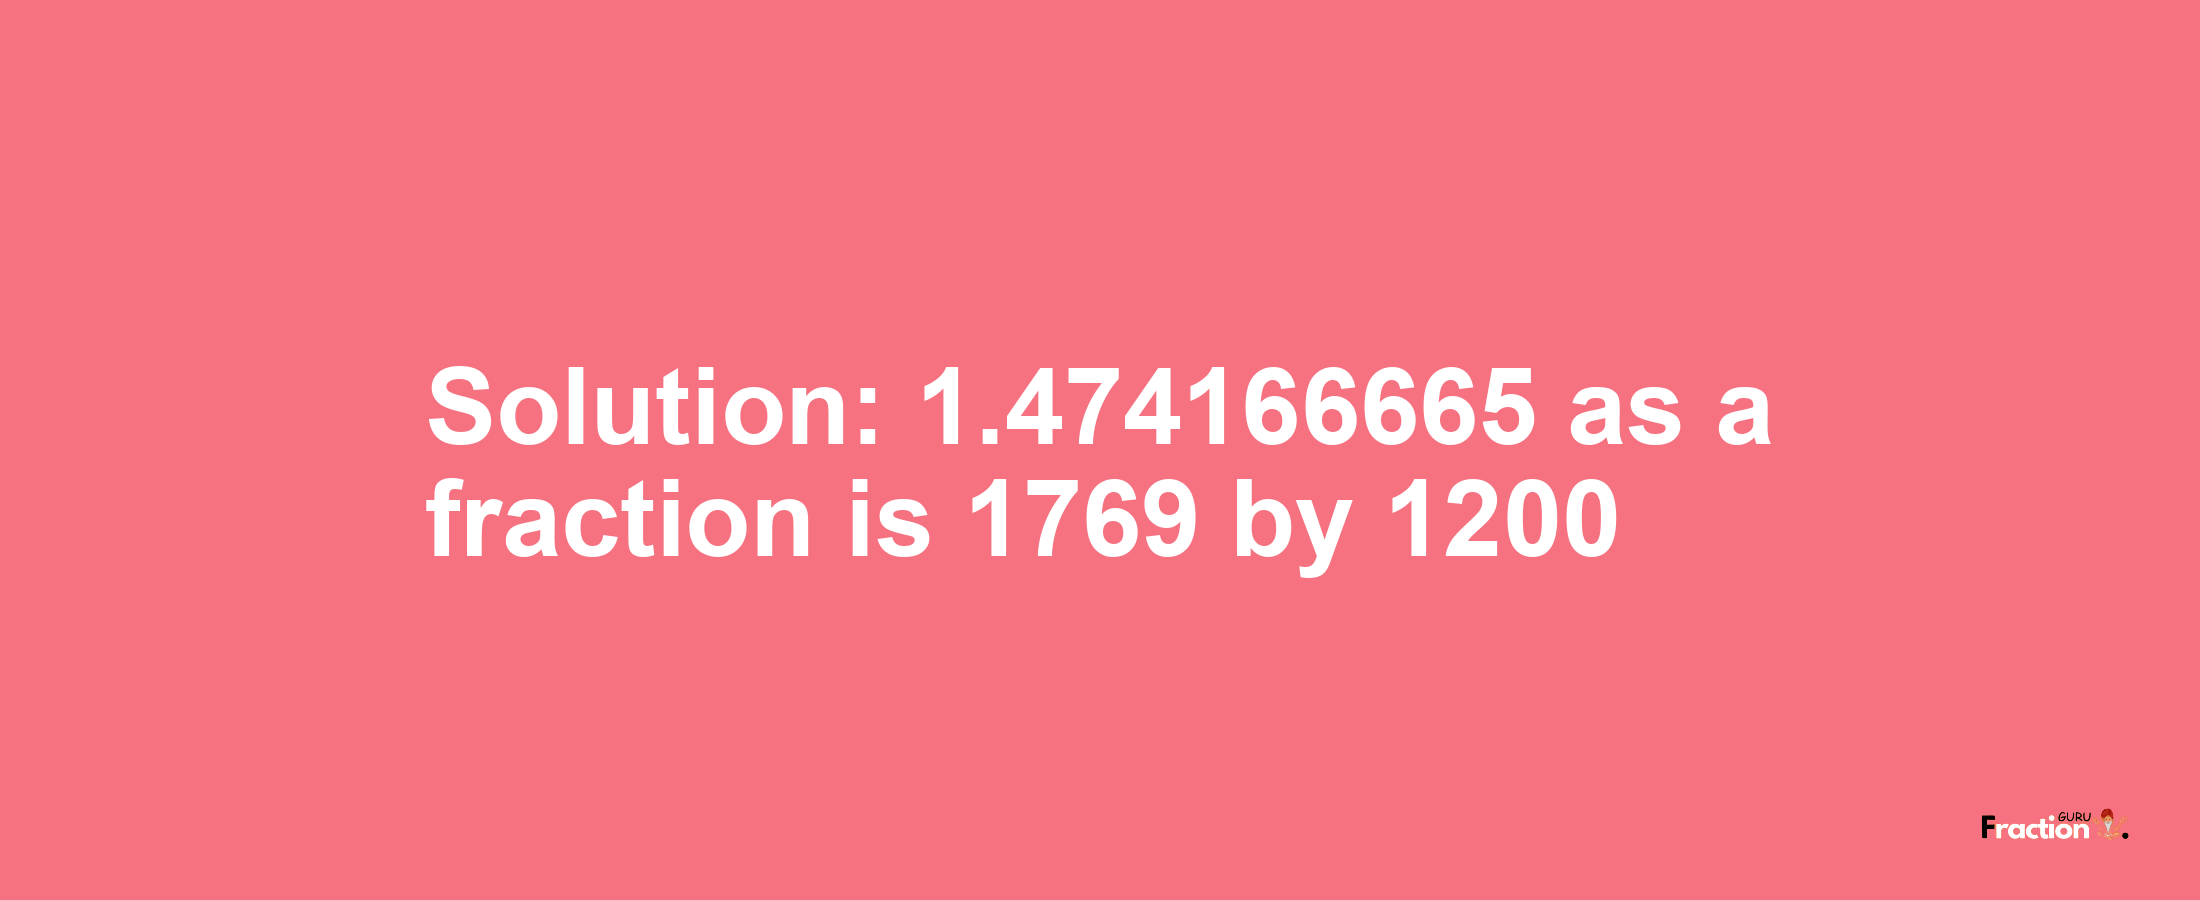 Solution:1.474166665 as a fraction is 1769/1200